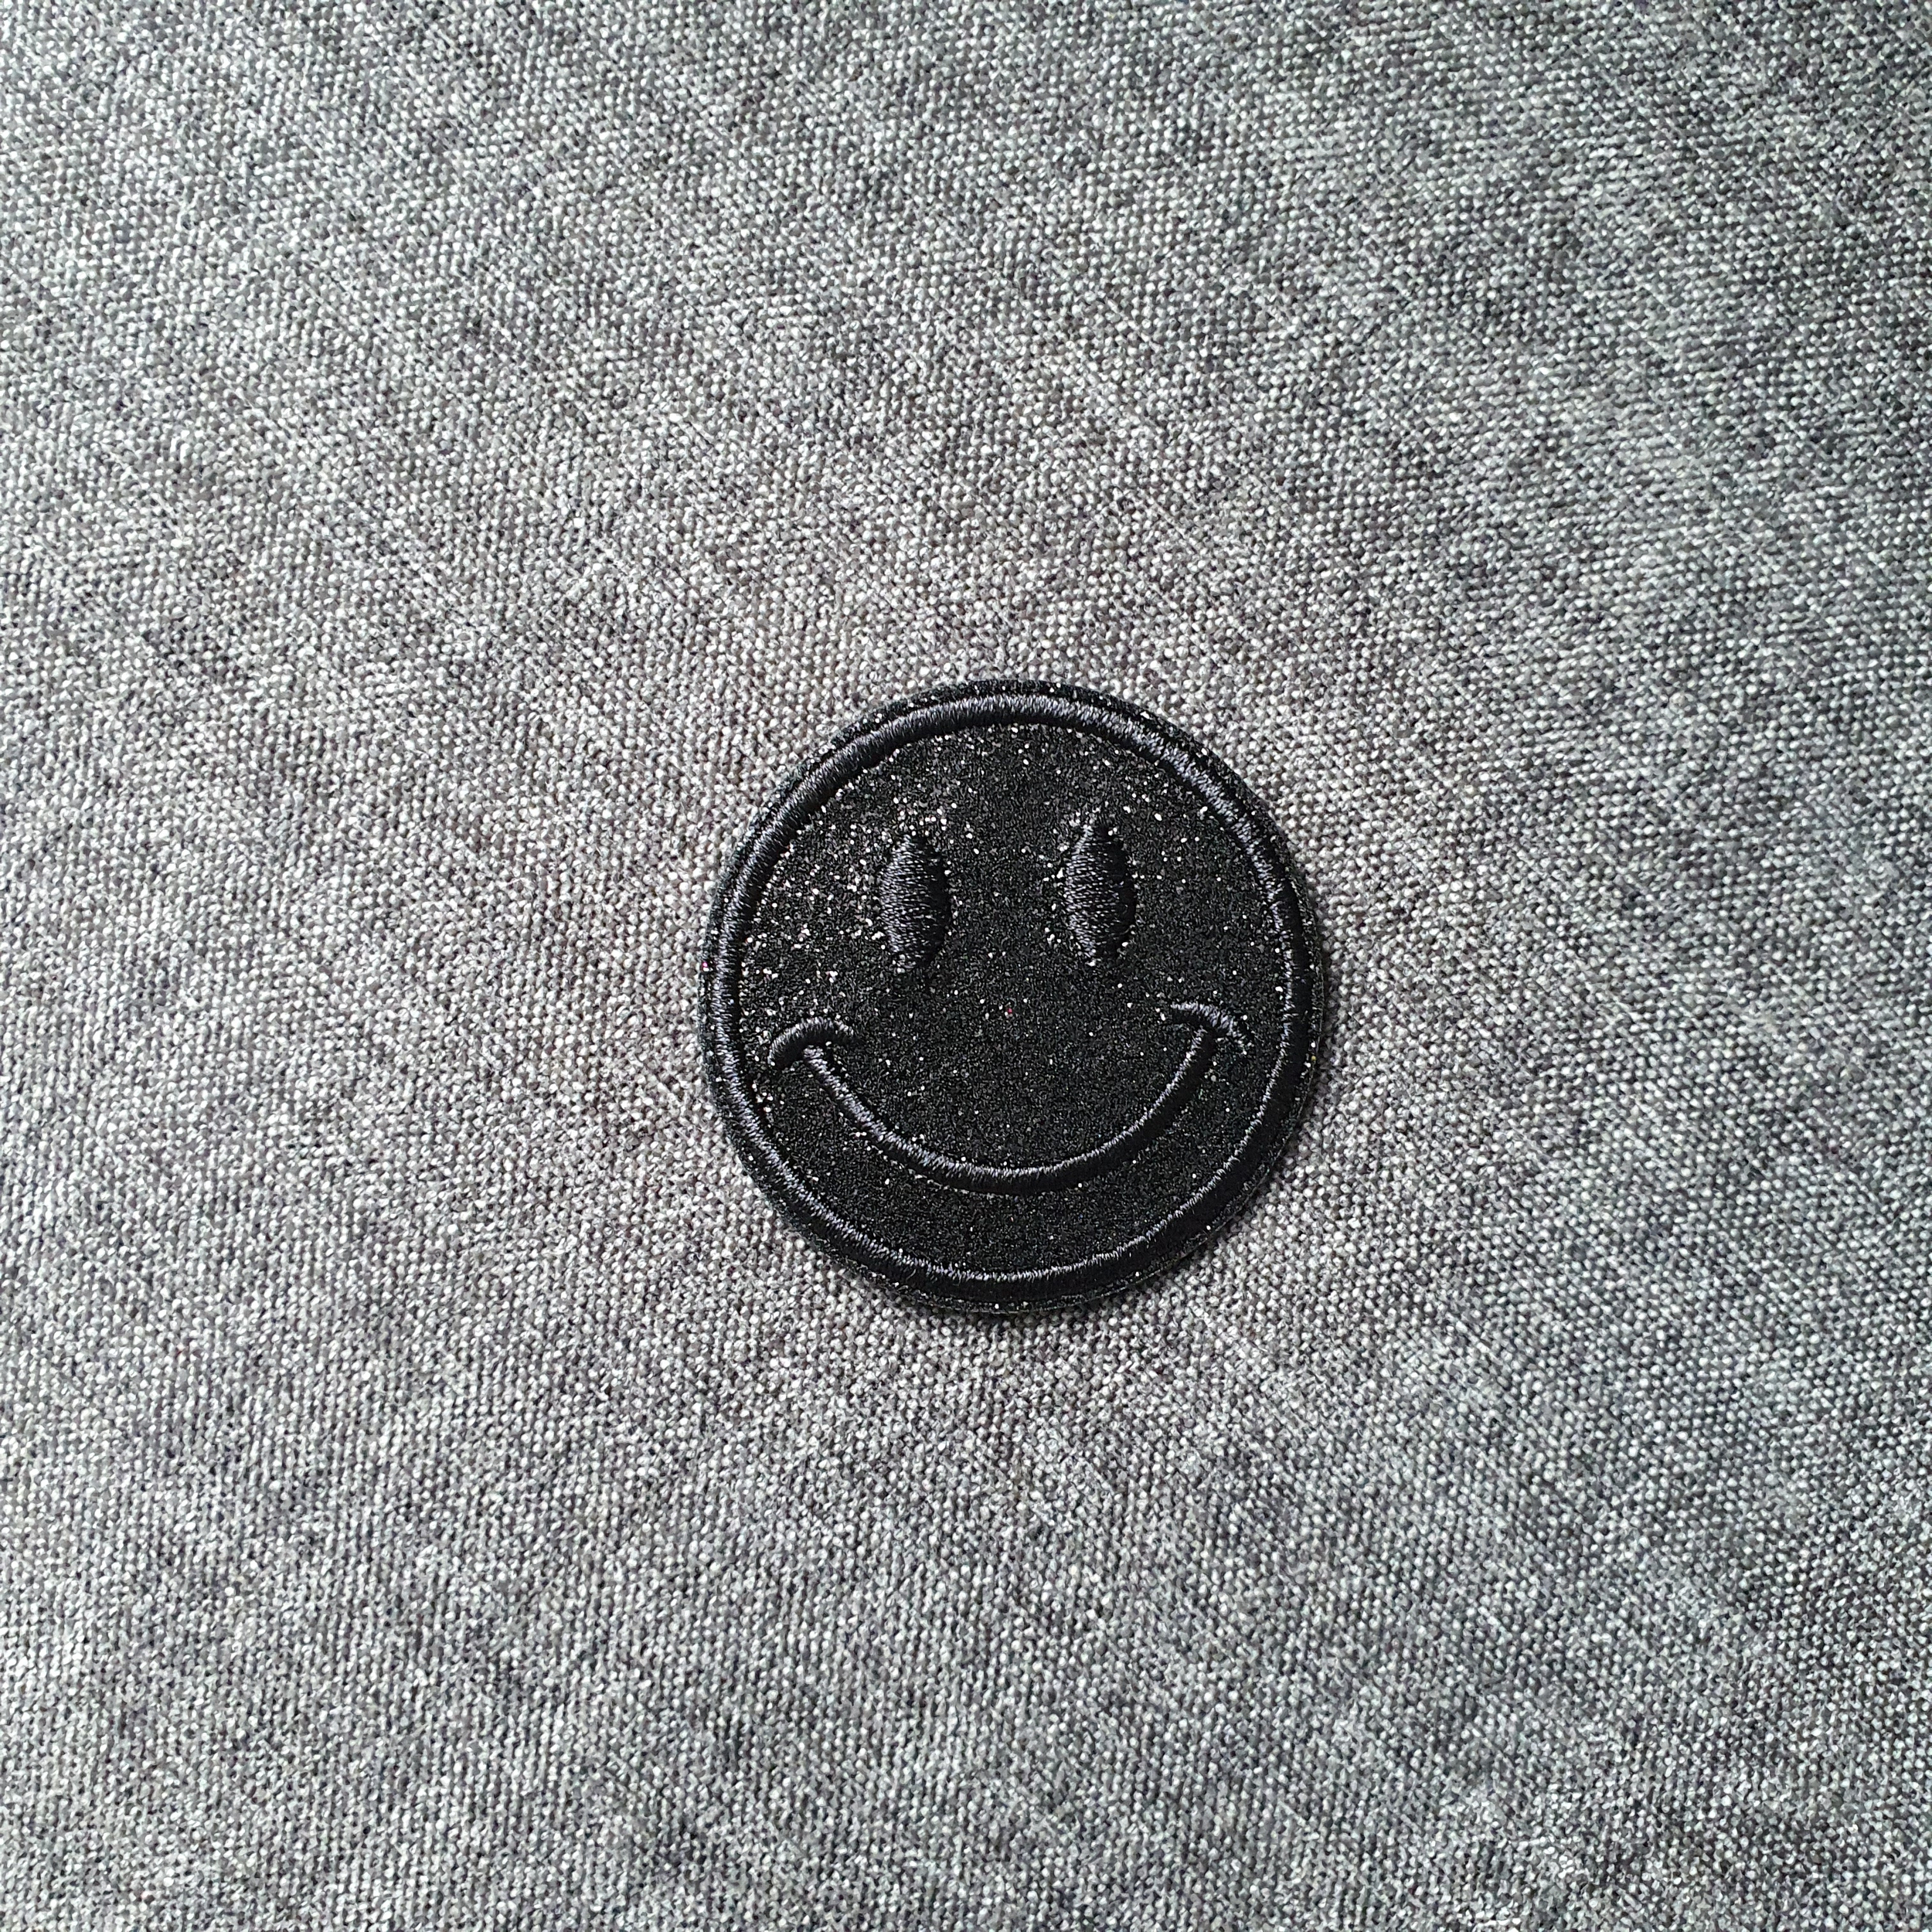 Patch thermocollant rond smiley brillant noir